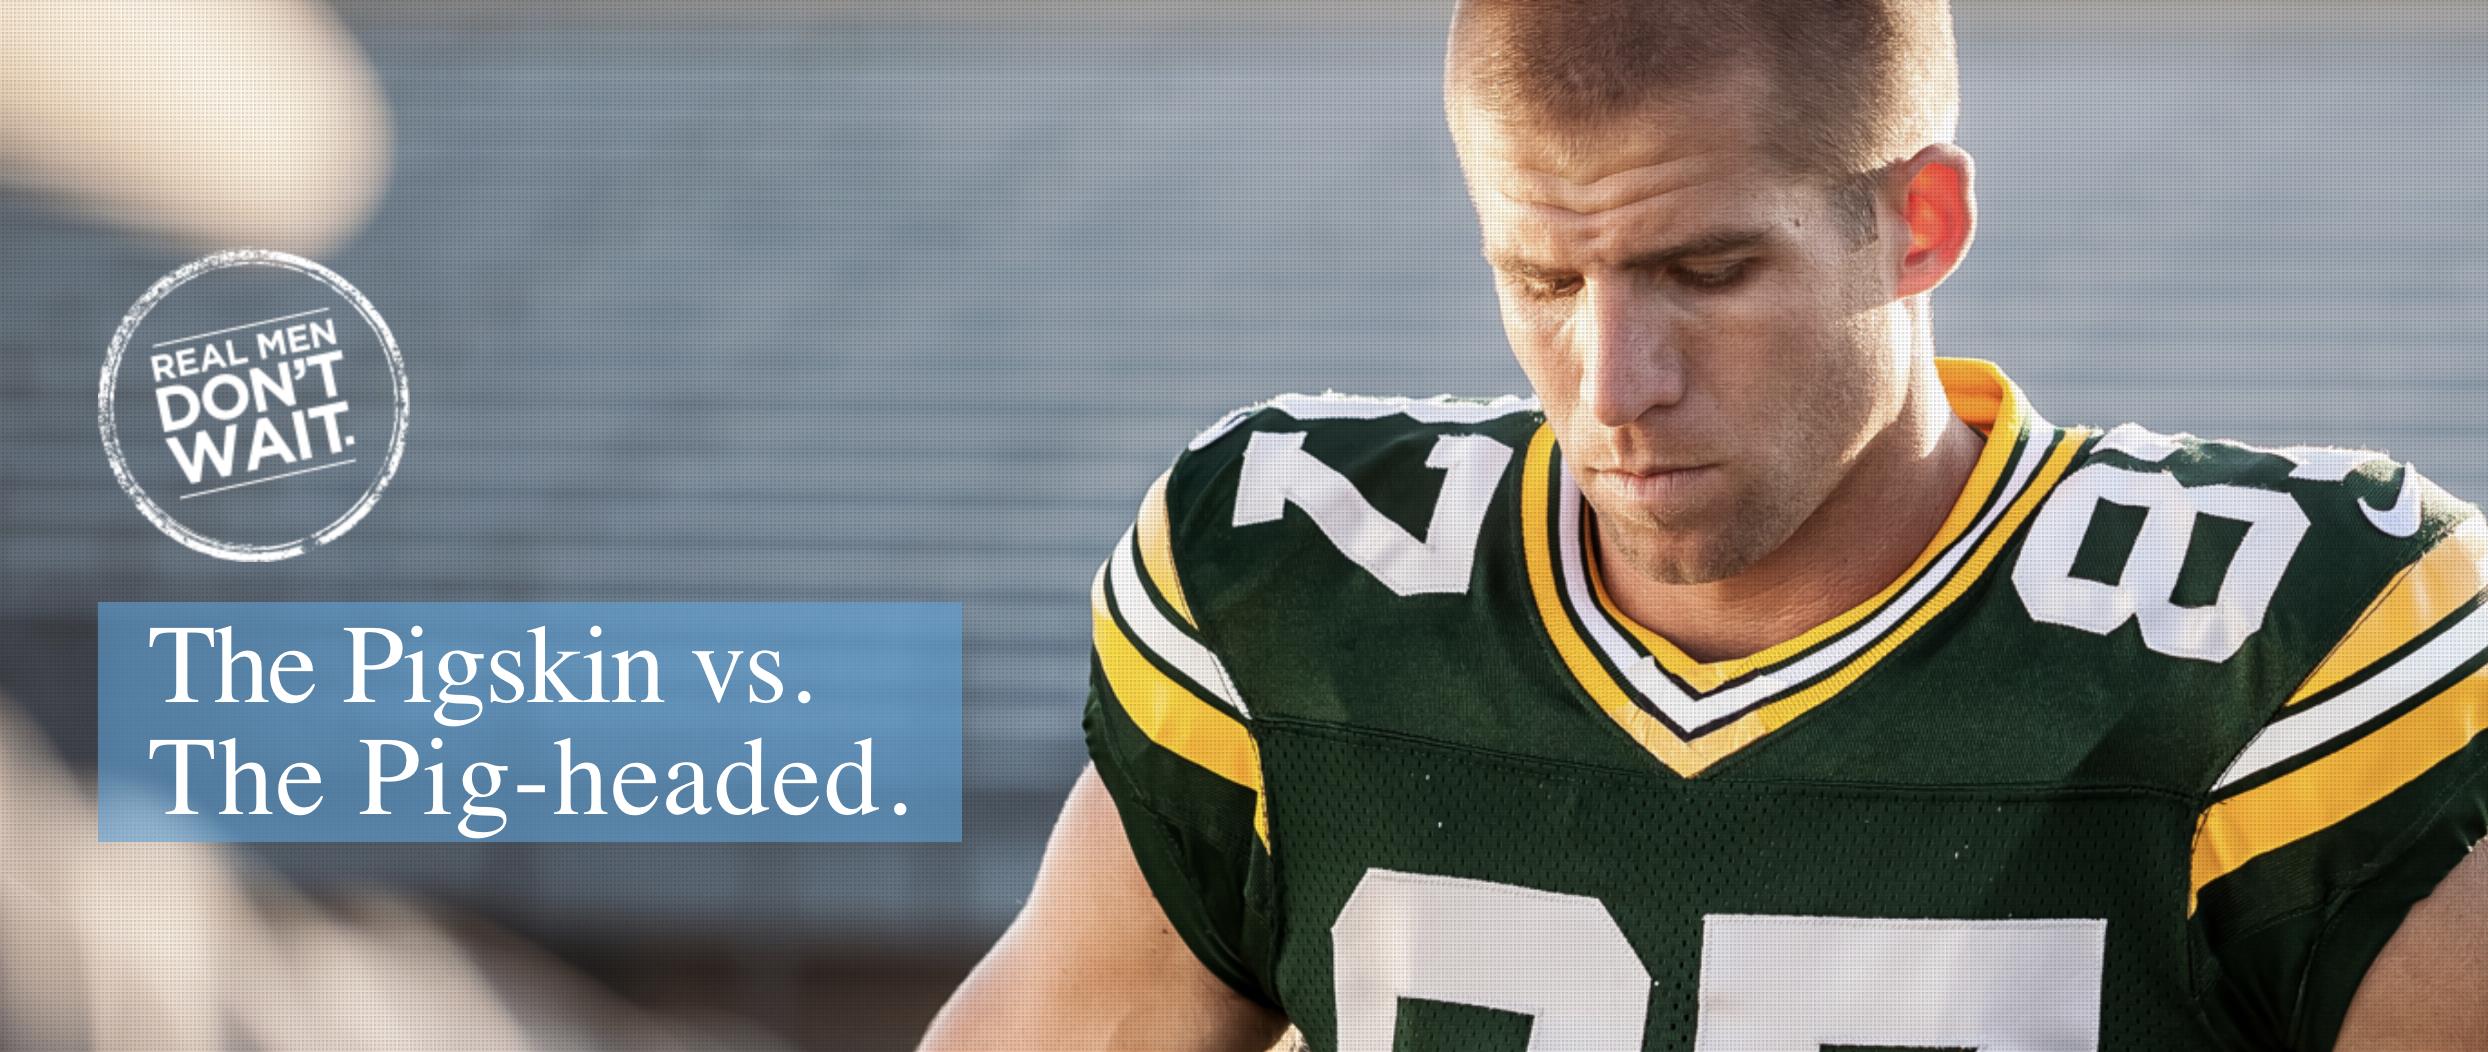 Bellin Health + Green Bay Packers Men's Health Campaign